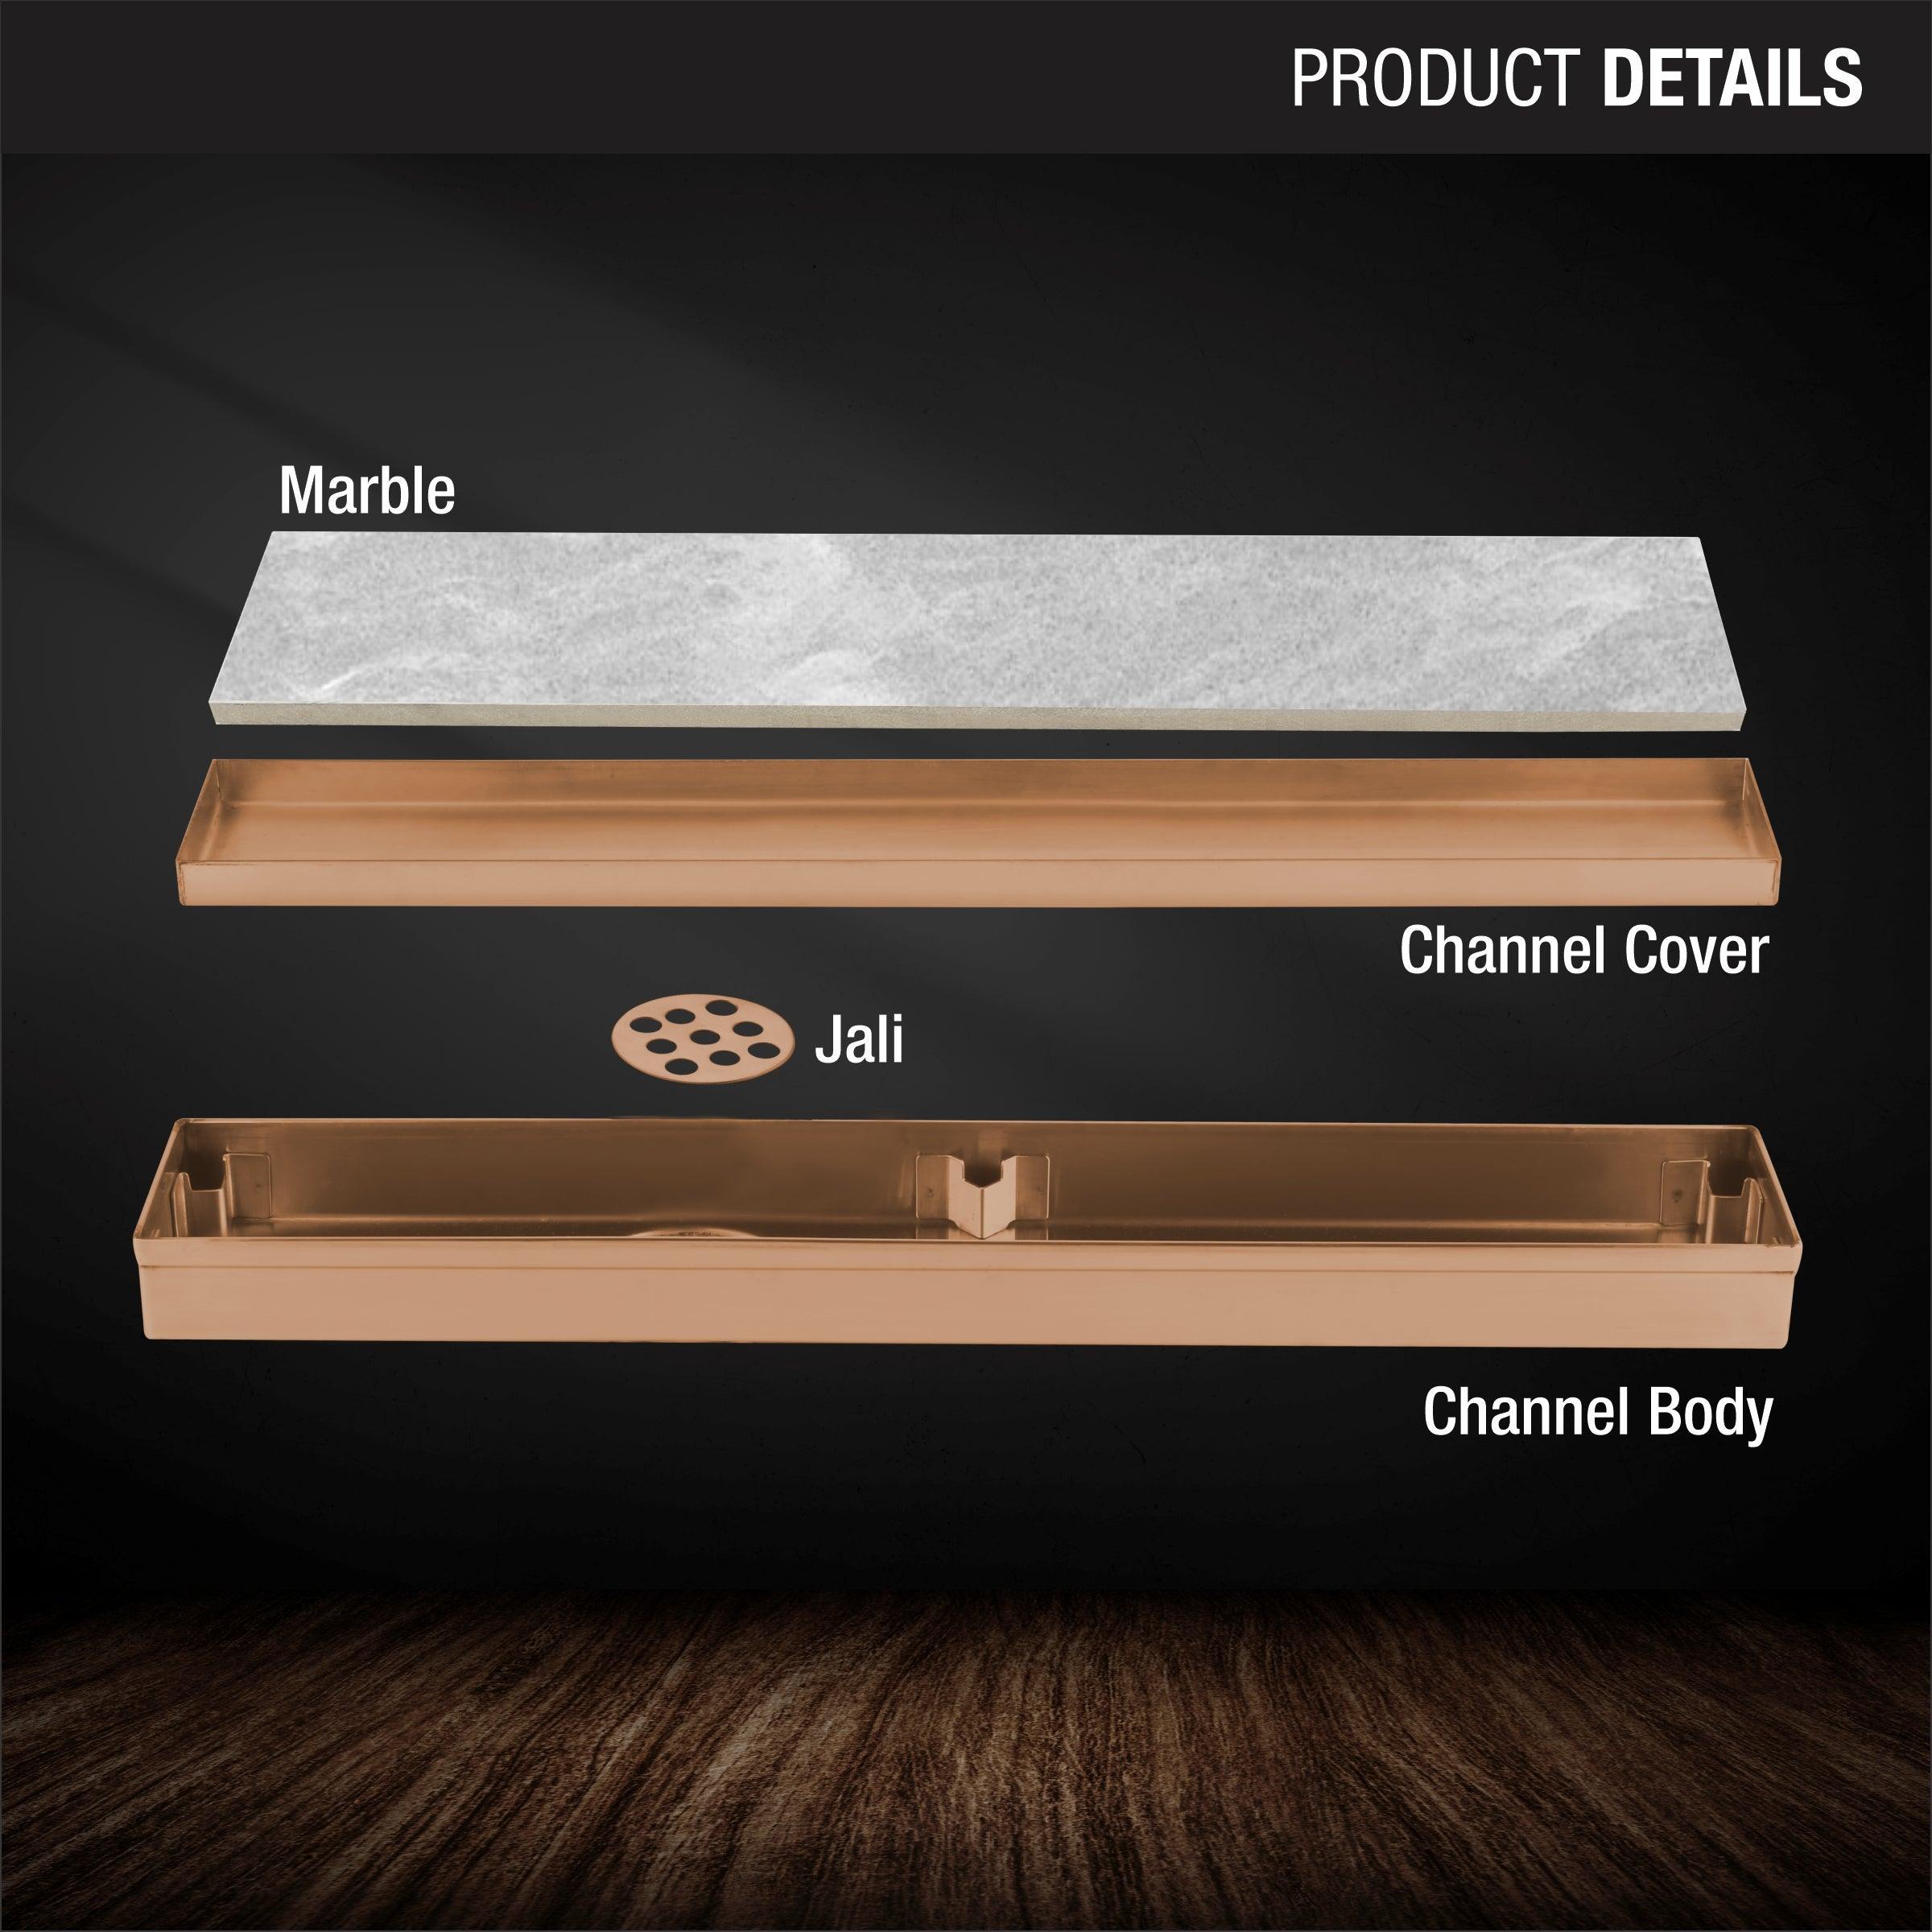 Marble Insert Shower Drain Channel - Antique Copper (36 x 2 Inches) product details